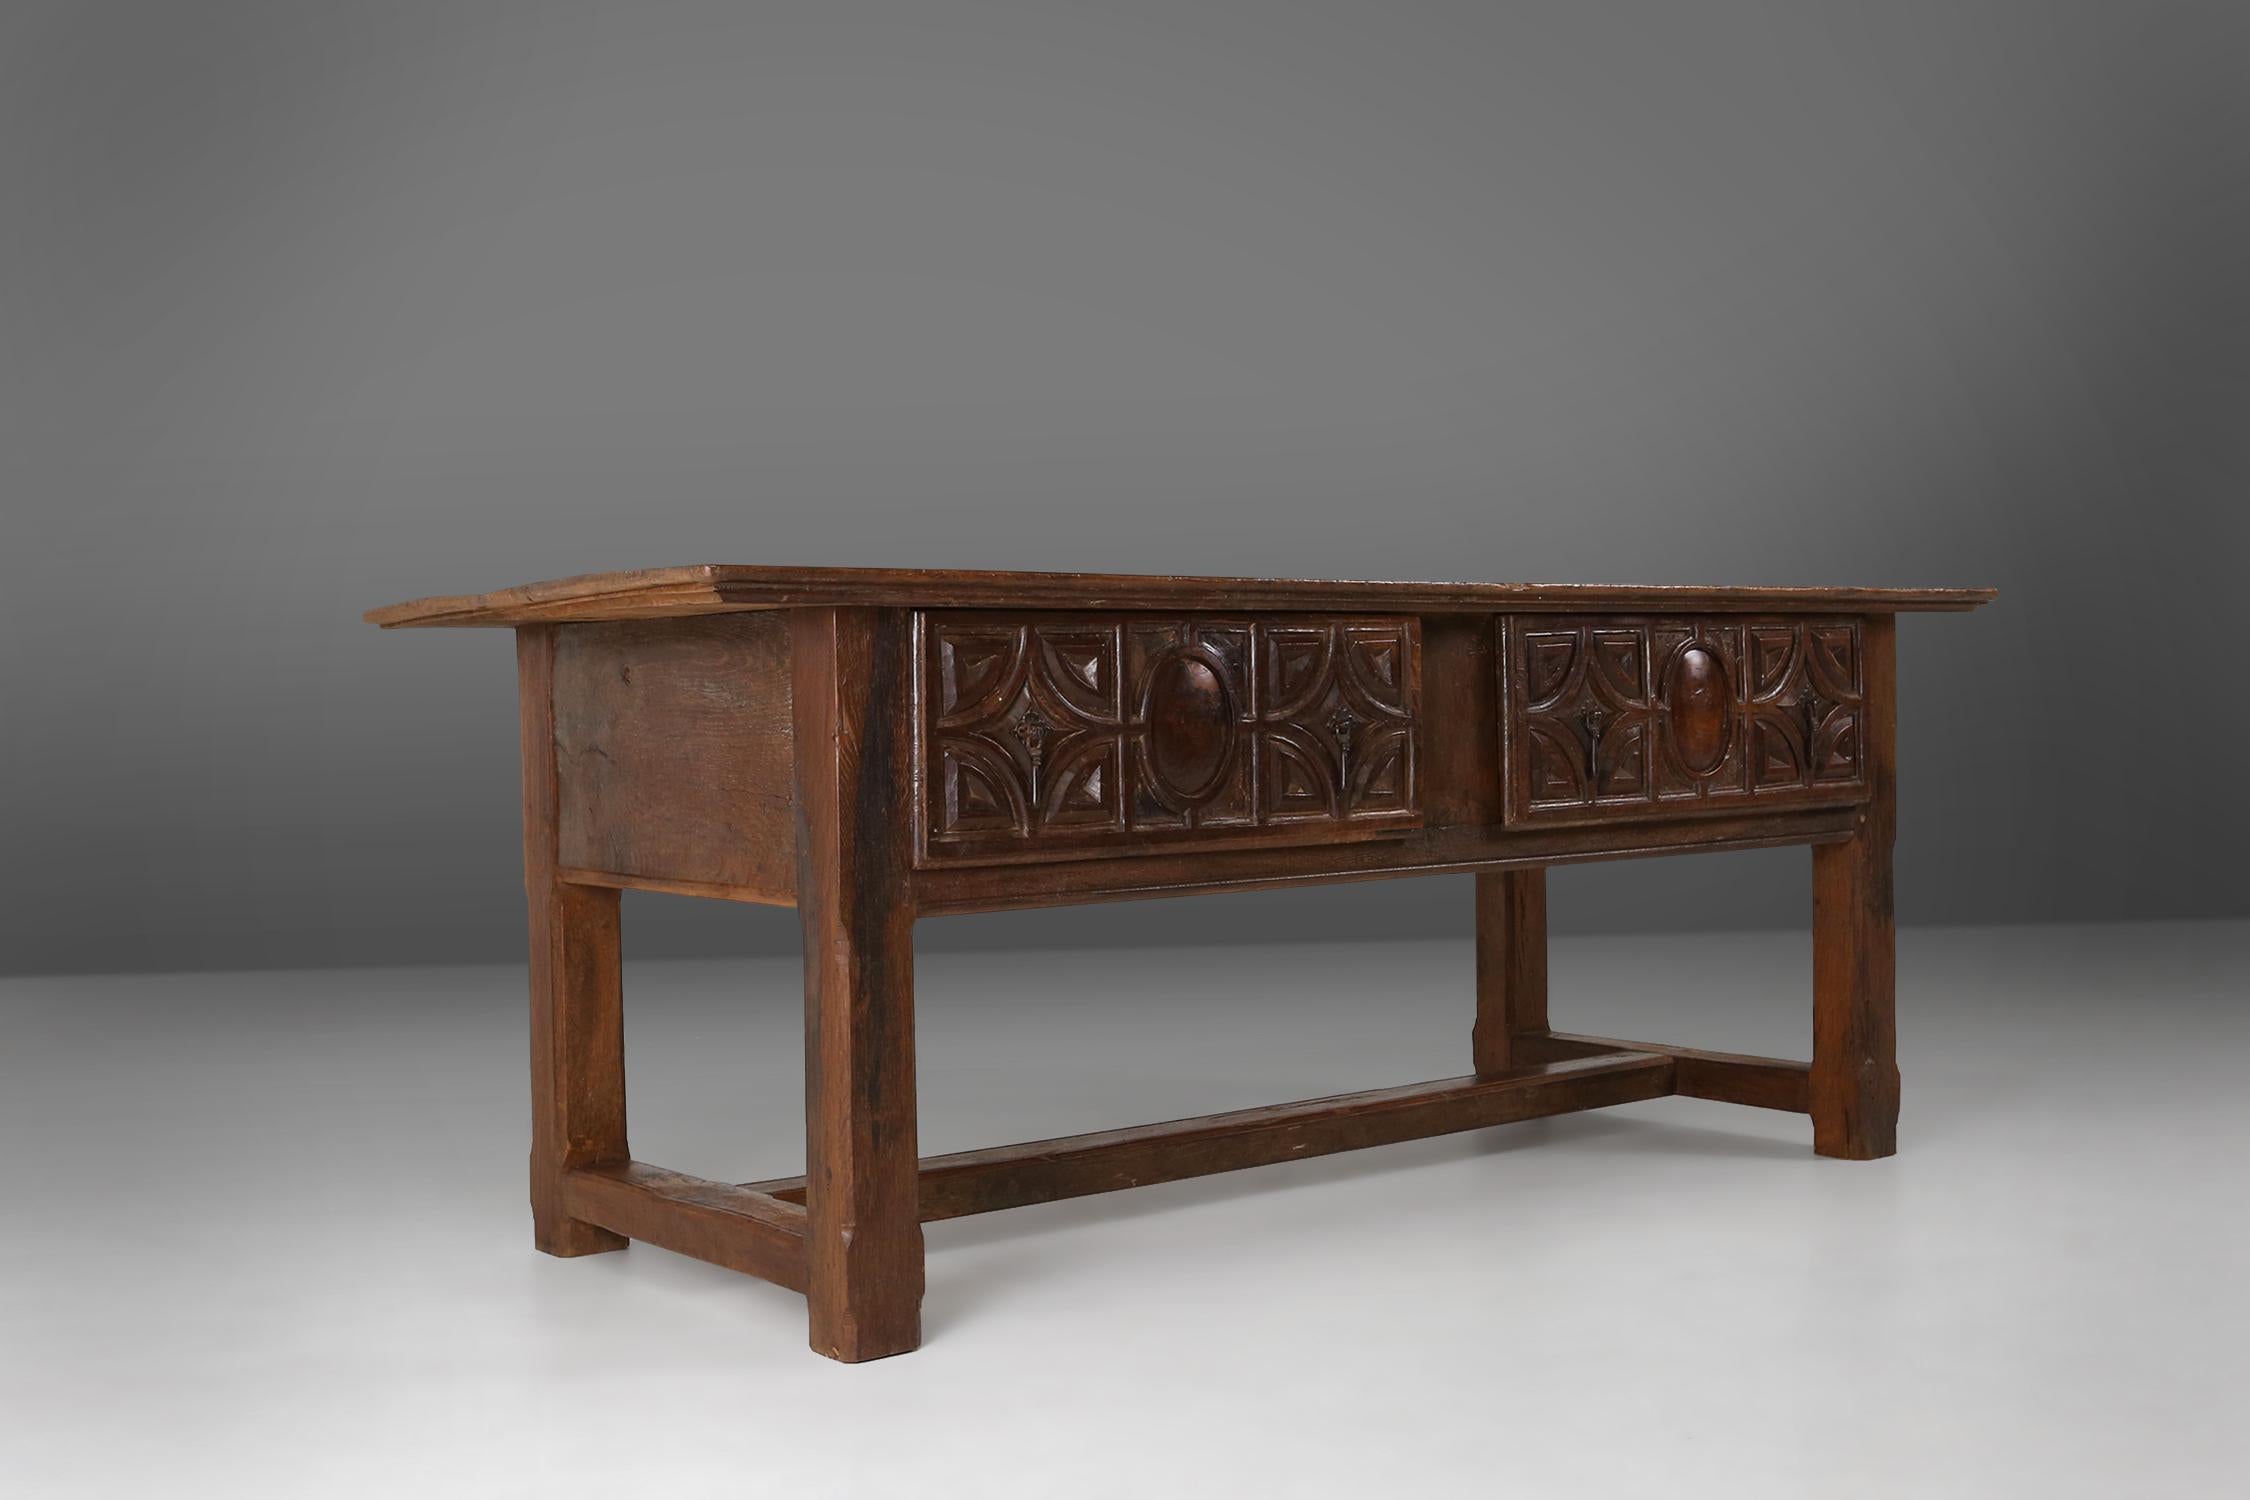 An exceptional antique Spanish console table in oak wood, with 2 large drawers and beautiful craftwork from from the 18th century. This exquisite piece of furniture with  two large drawers, providing ample storage space for your belongings. Hand